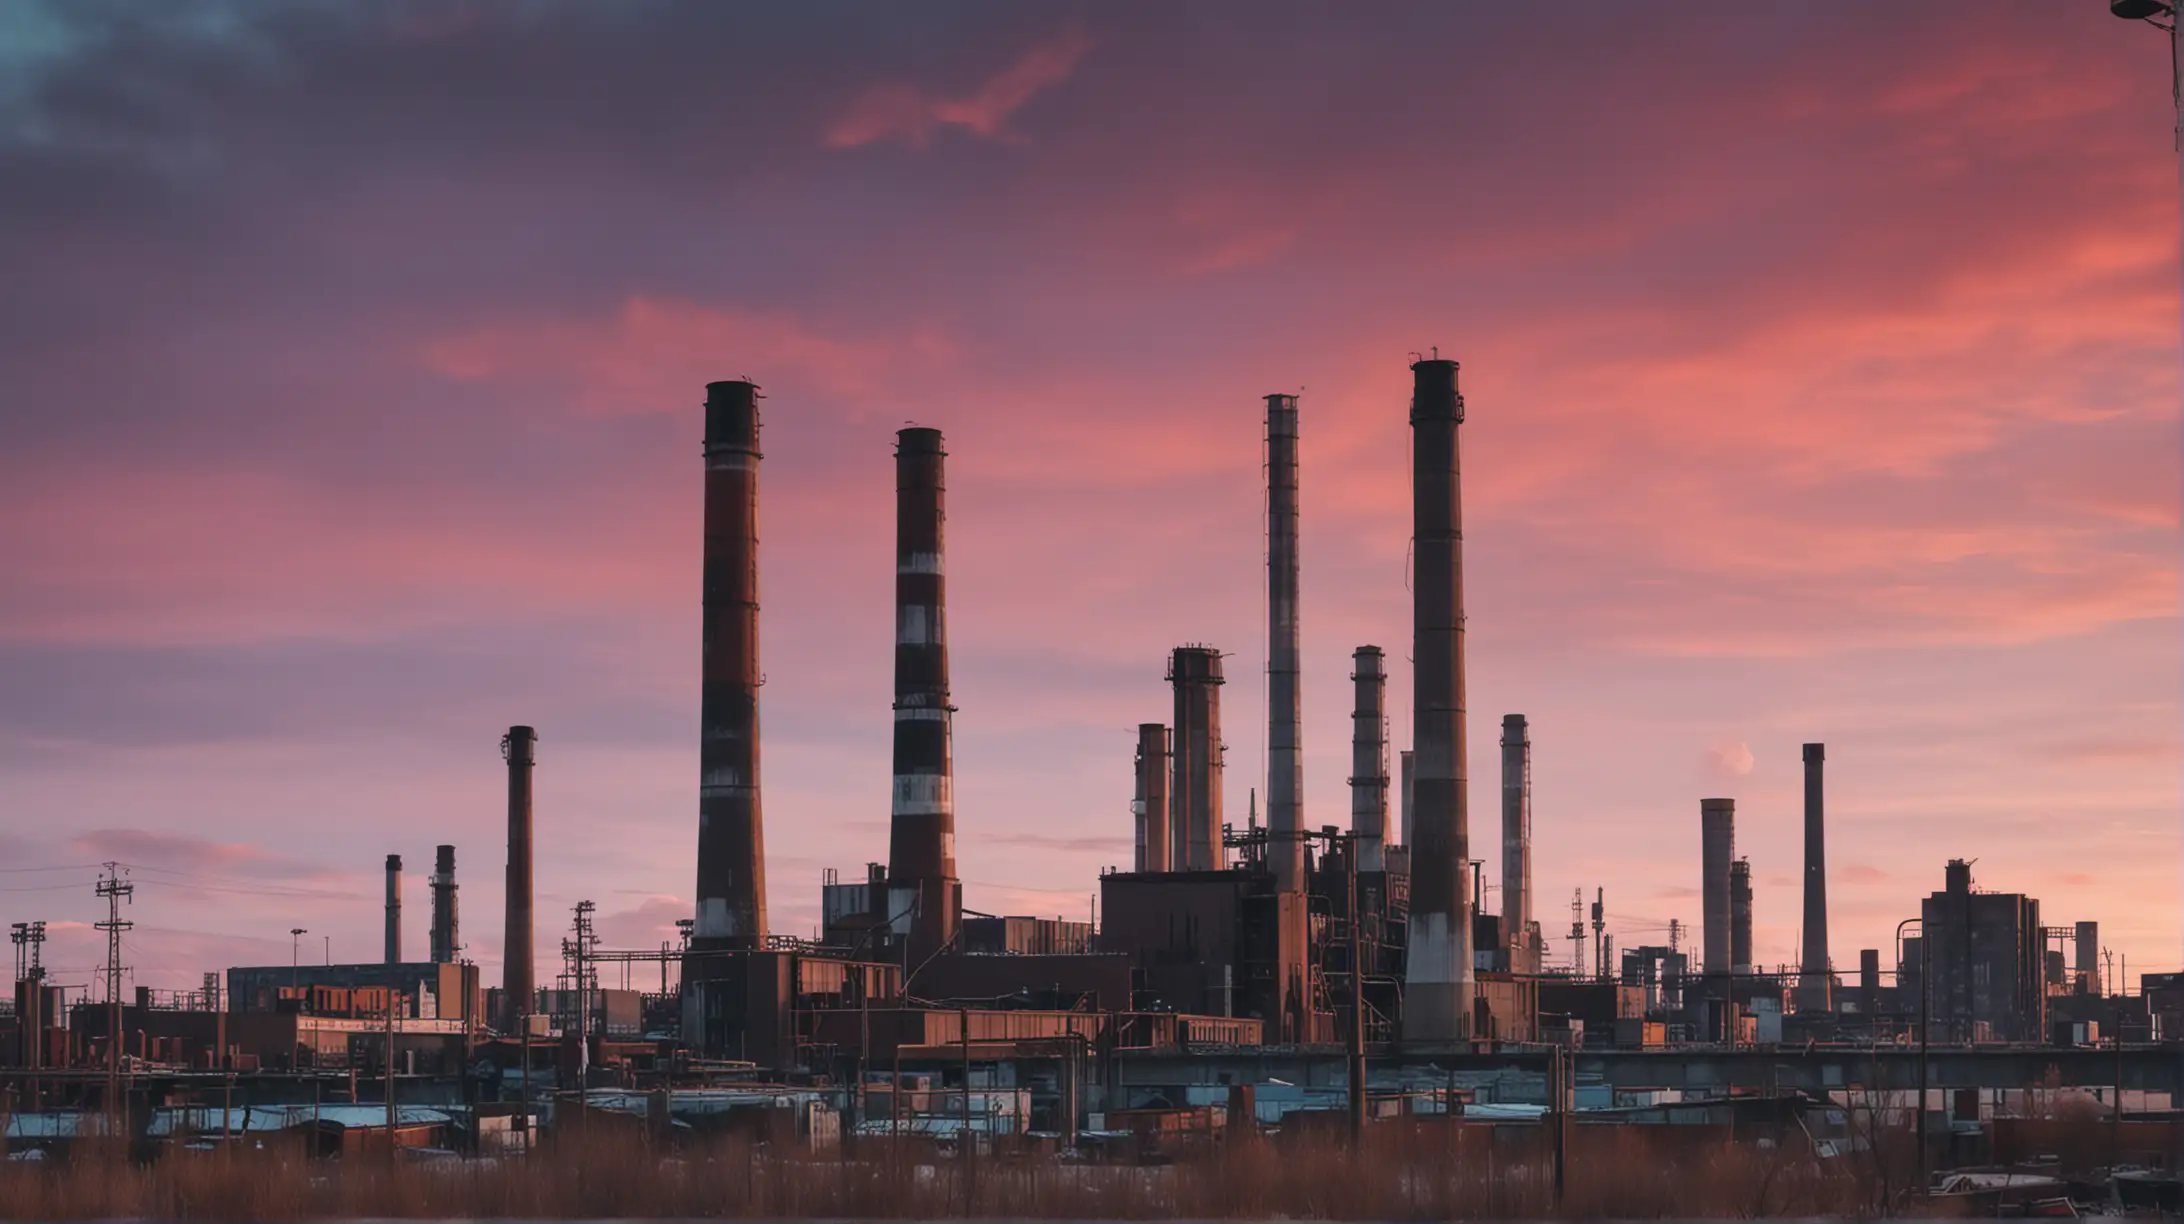 An abandoned industrial area of a city at medium distance, large empty smokestacks against a colorful sky. Cinematic lighting, photographic quality, vibrant colors.